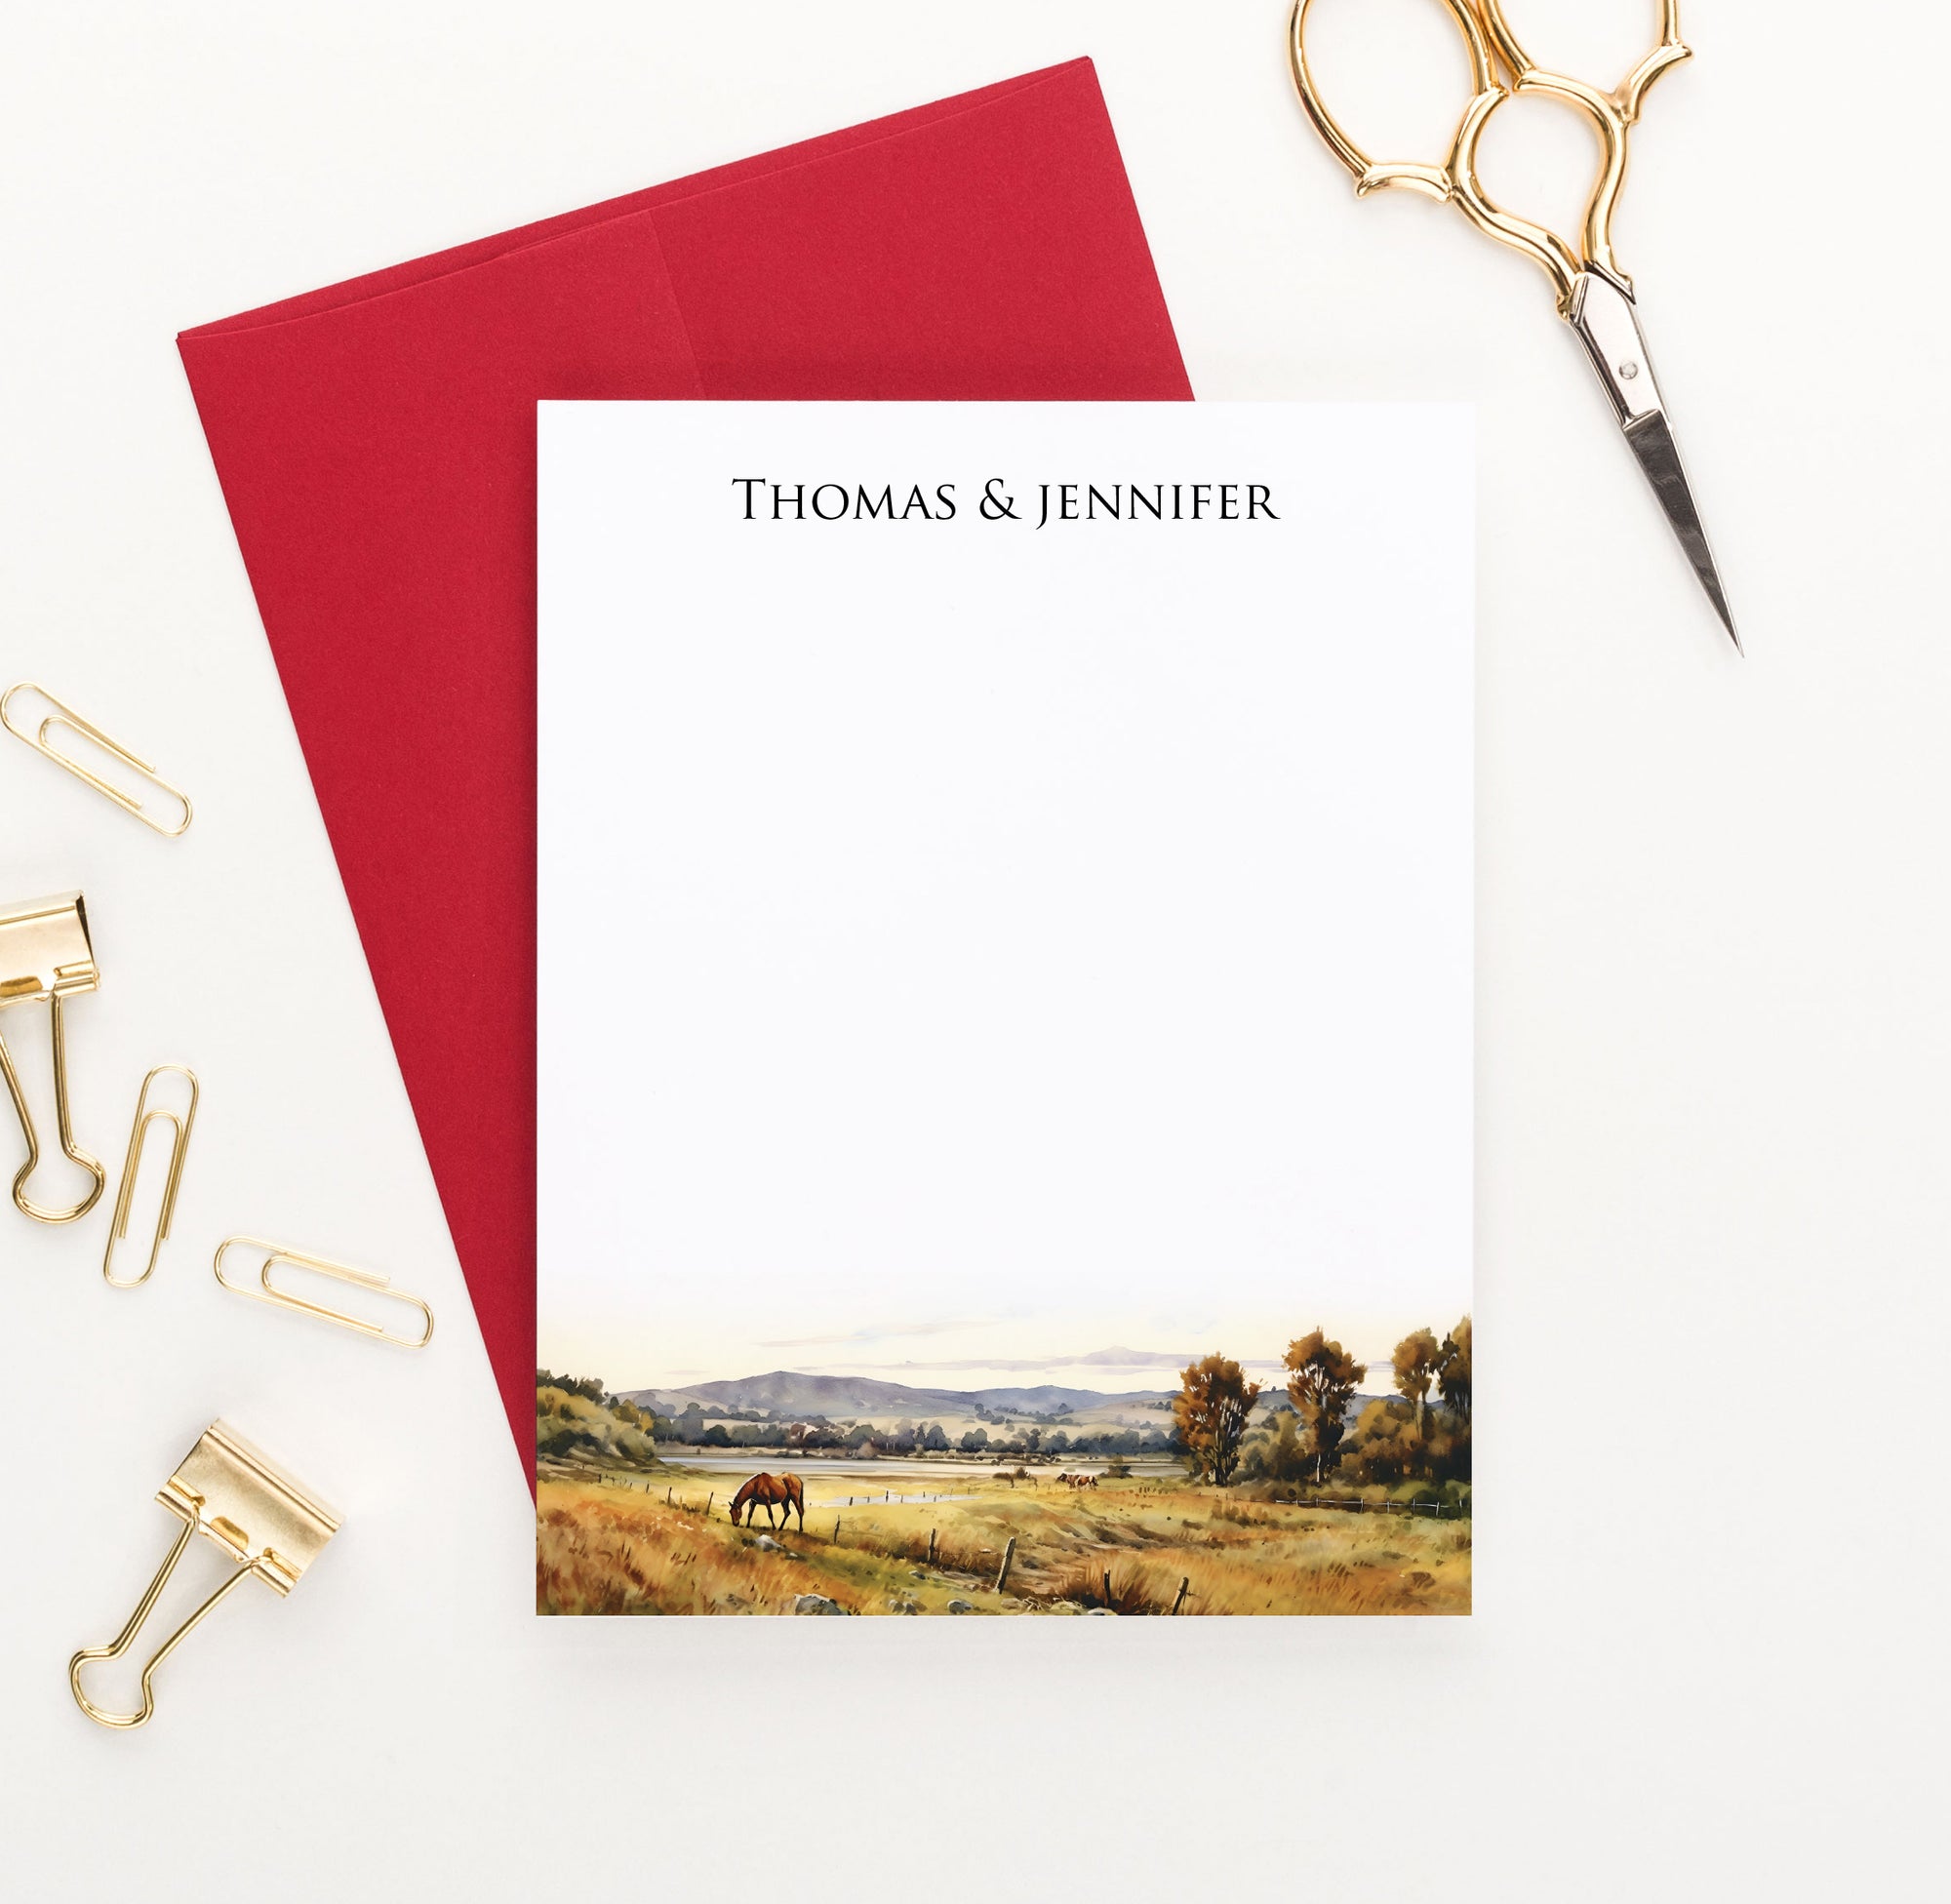 Pasture Landscape Personalized Couple Stationery With Horses